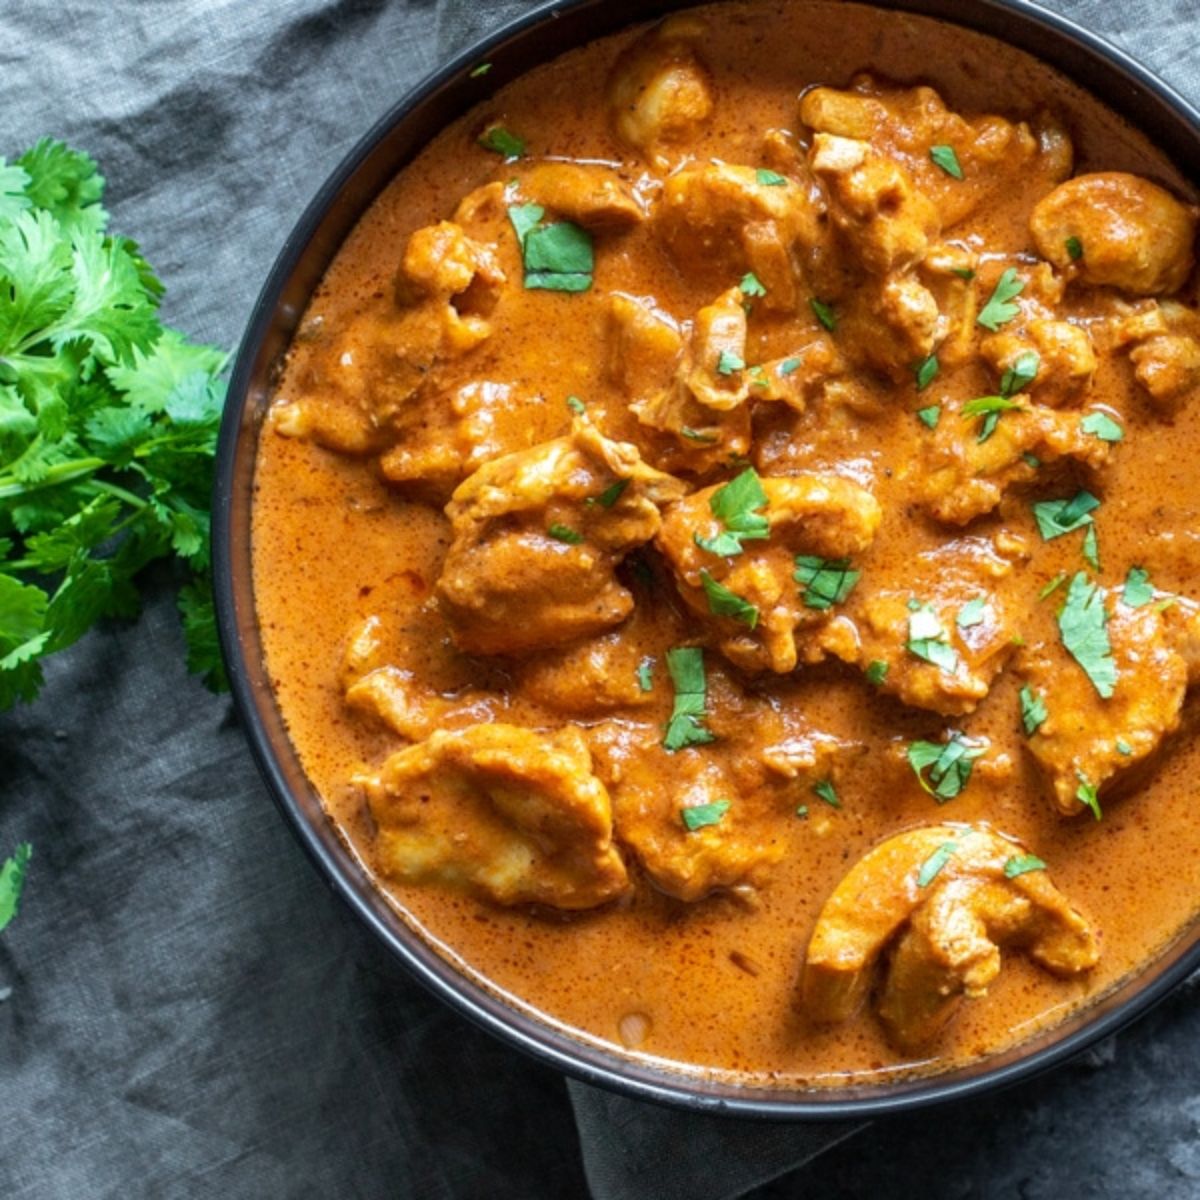 On a light gray cloth next to a pile of coriander is a dark gray bowl filled with butter chicken